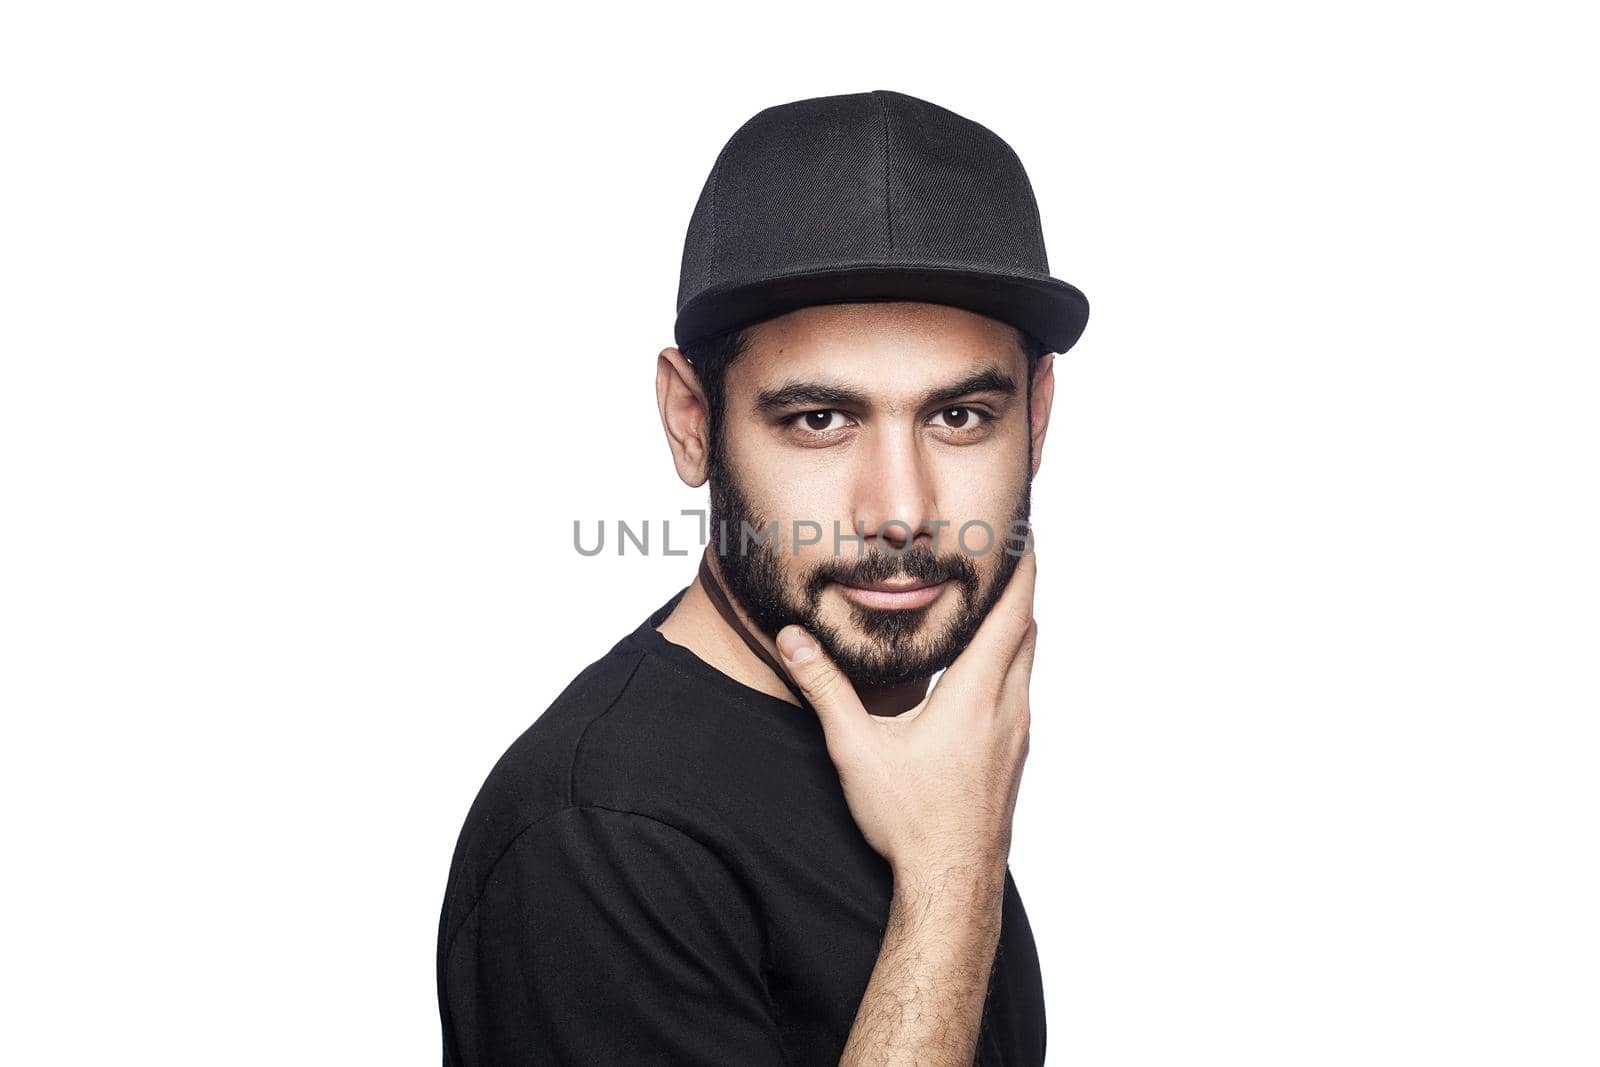 Portrait of young beautiful sexy man with black t-shirt and cap posing and looking at camera. studio shot, isolated on white background.